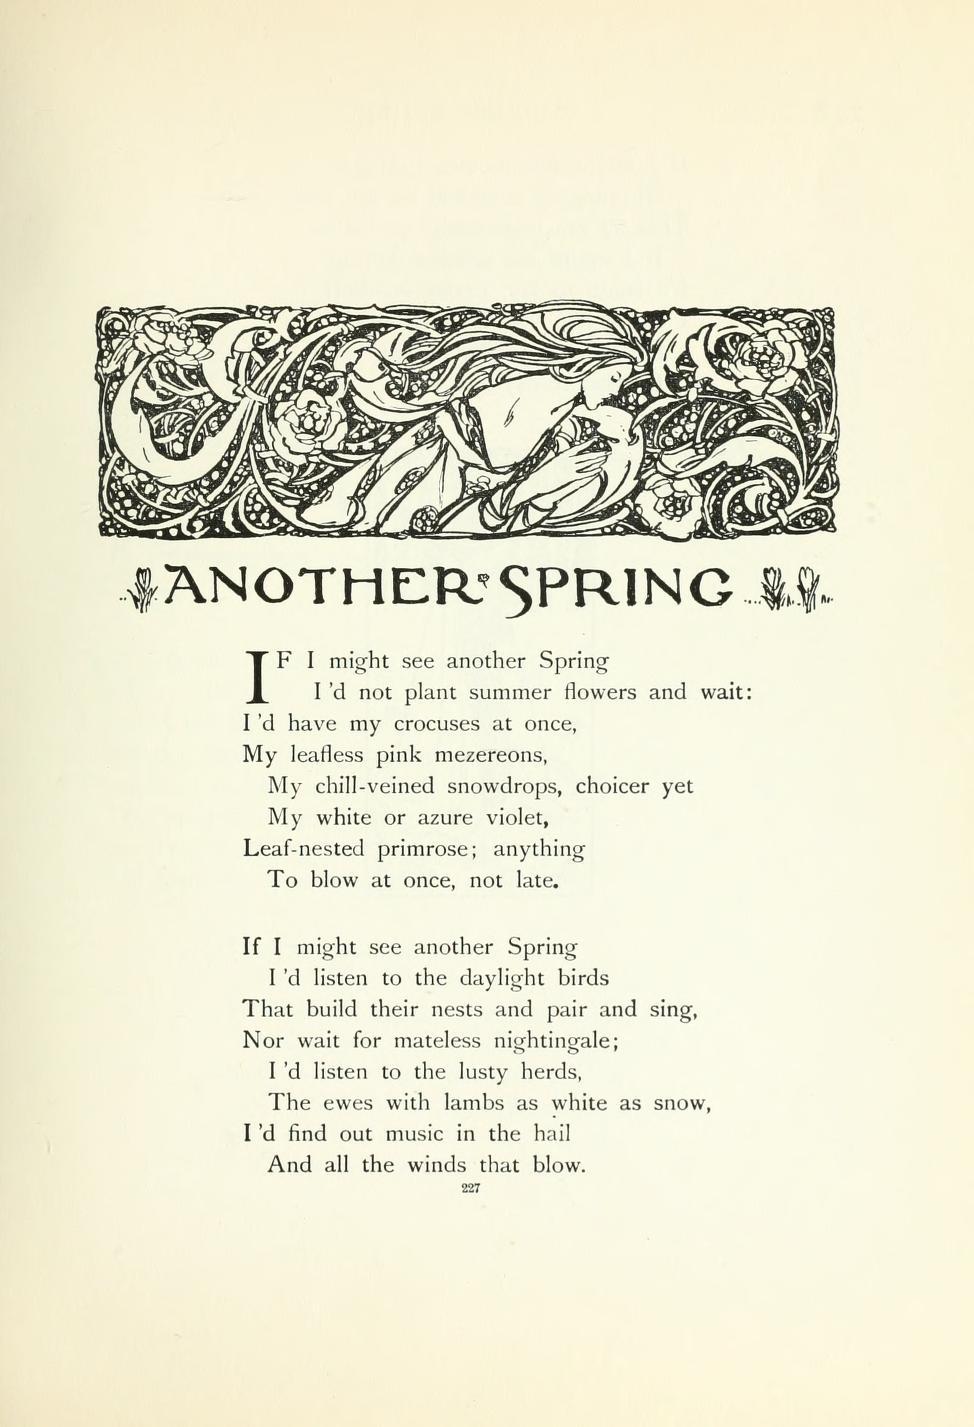 First verses of Another Spring by Christina Rossetti, illustrated by Florence Harrison.